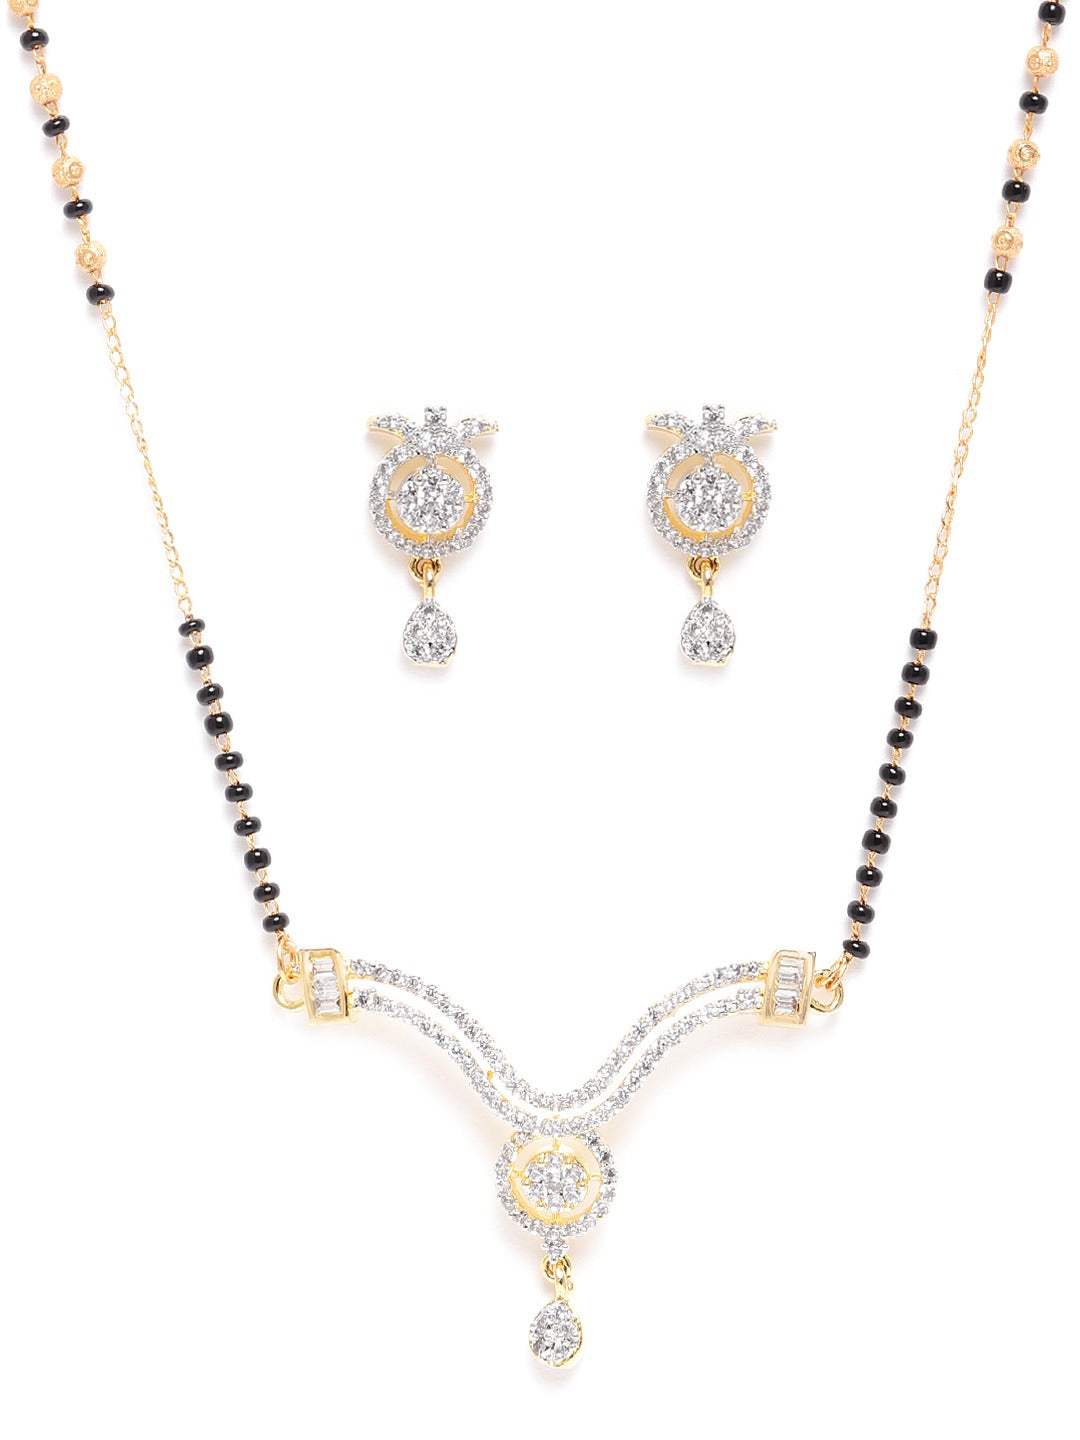 Black Gold-Plated AD Studded & Beaded Mangalsutra & Earrings Set